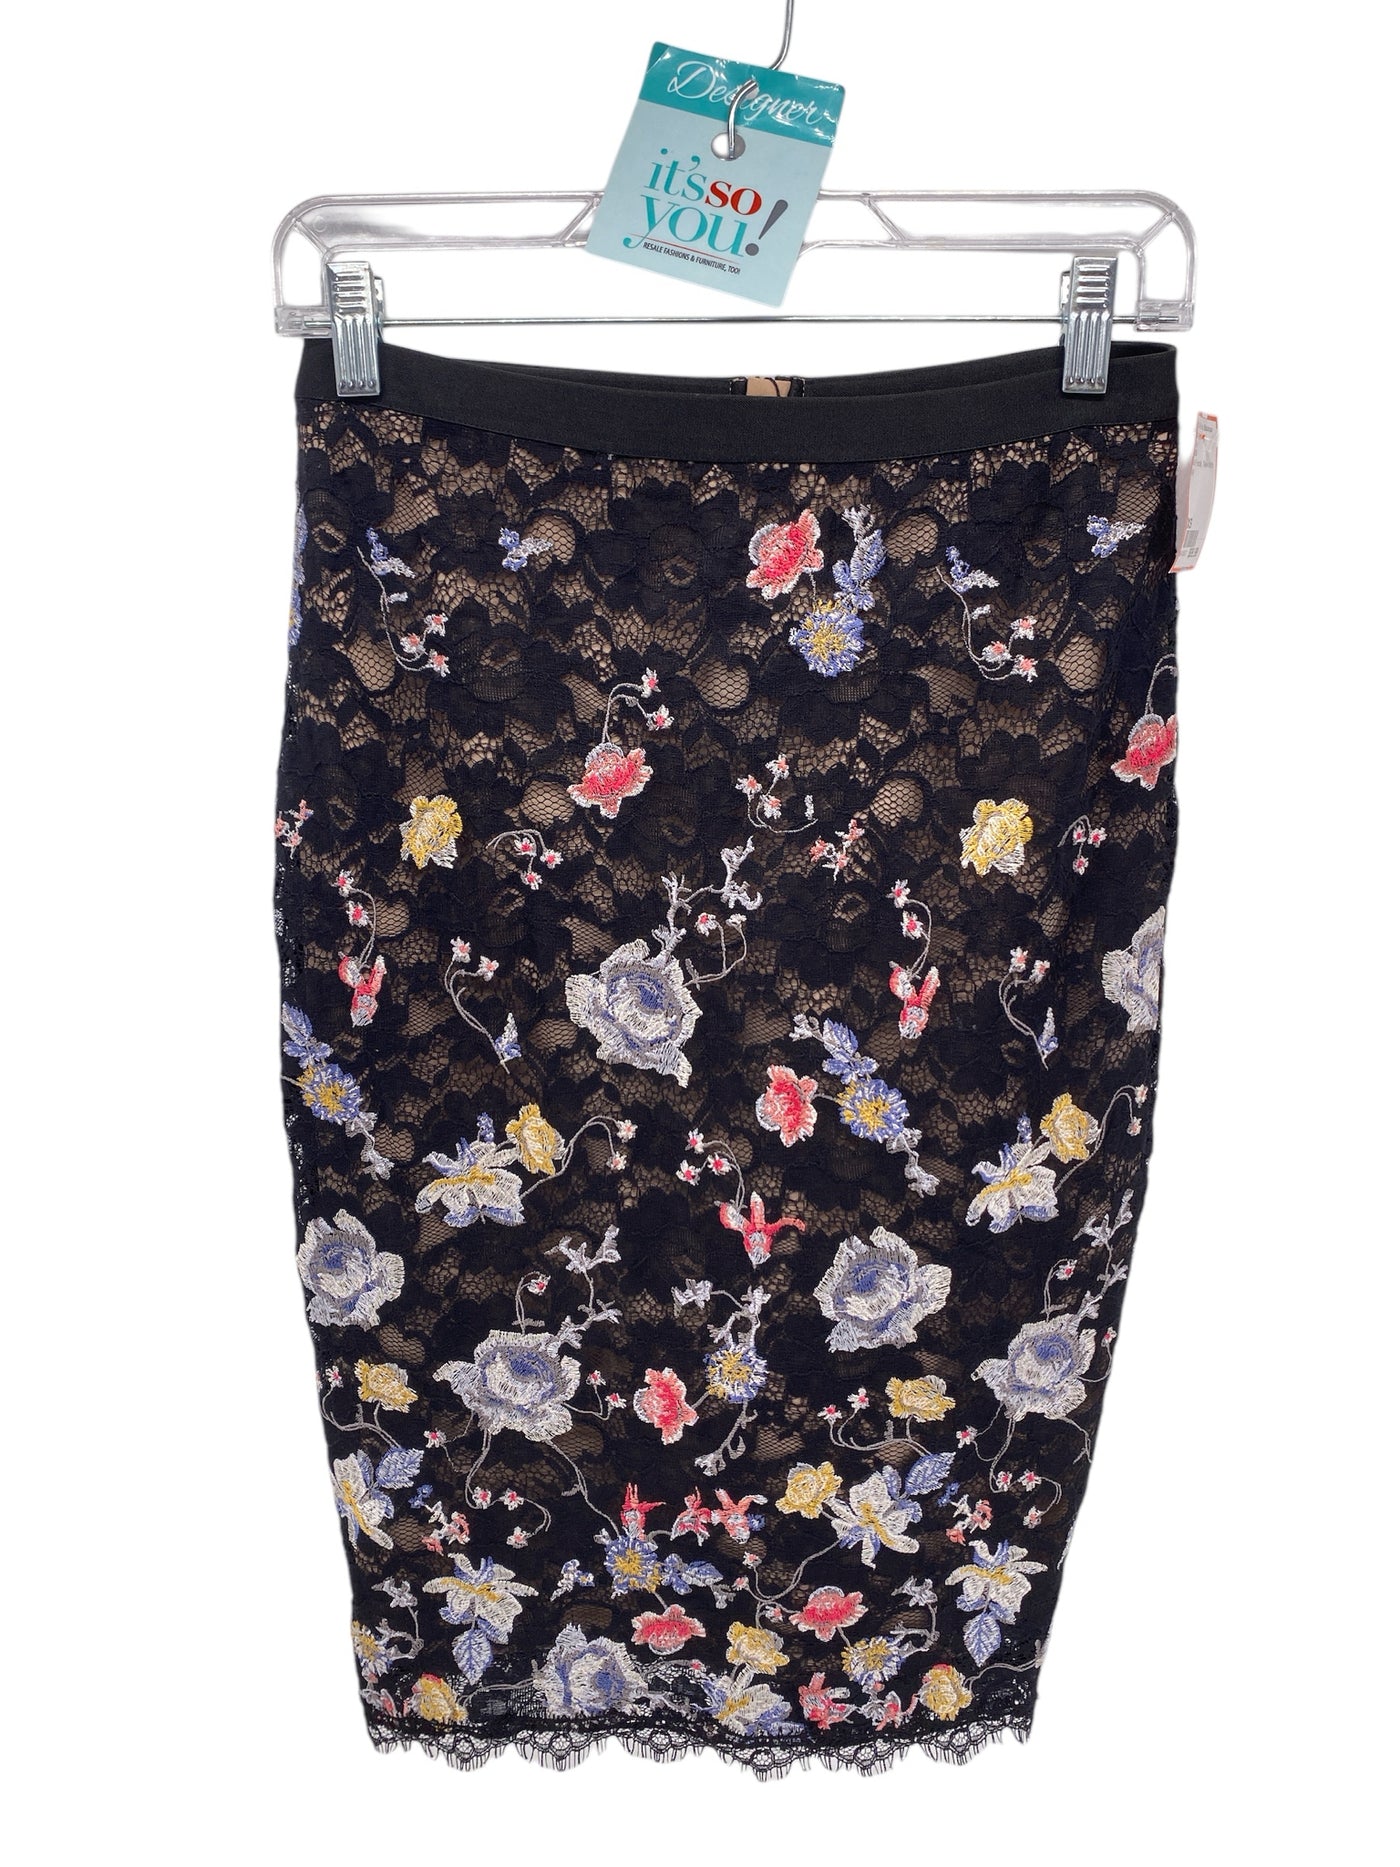 BCBG Misses Size XS Black Floral New With Tags Skirt